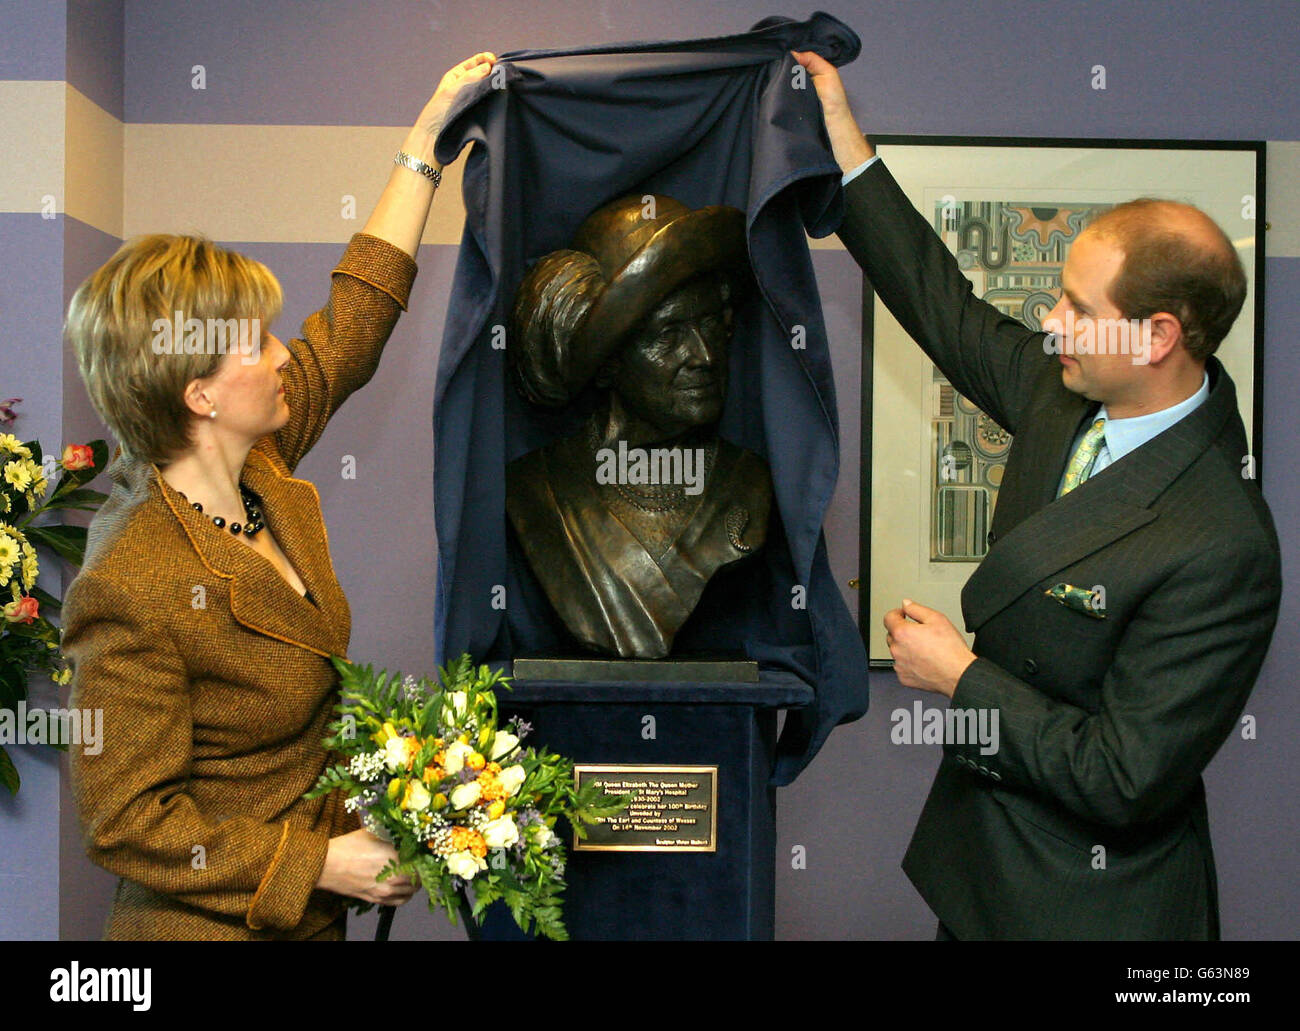 Prince Edward, Earl of Wessex and his wife Sophie, Countess of Wessex, unveil a statue of Queen Elizabeth, the Queen Mother, at St Mary's Hospital. * The statue is the last likeness taken of the Queen Mother, completed by sculptor Vivien Mallock four days before her death on March 30, 2002. Stock Photo